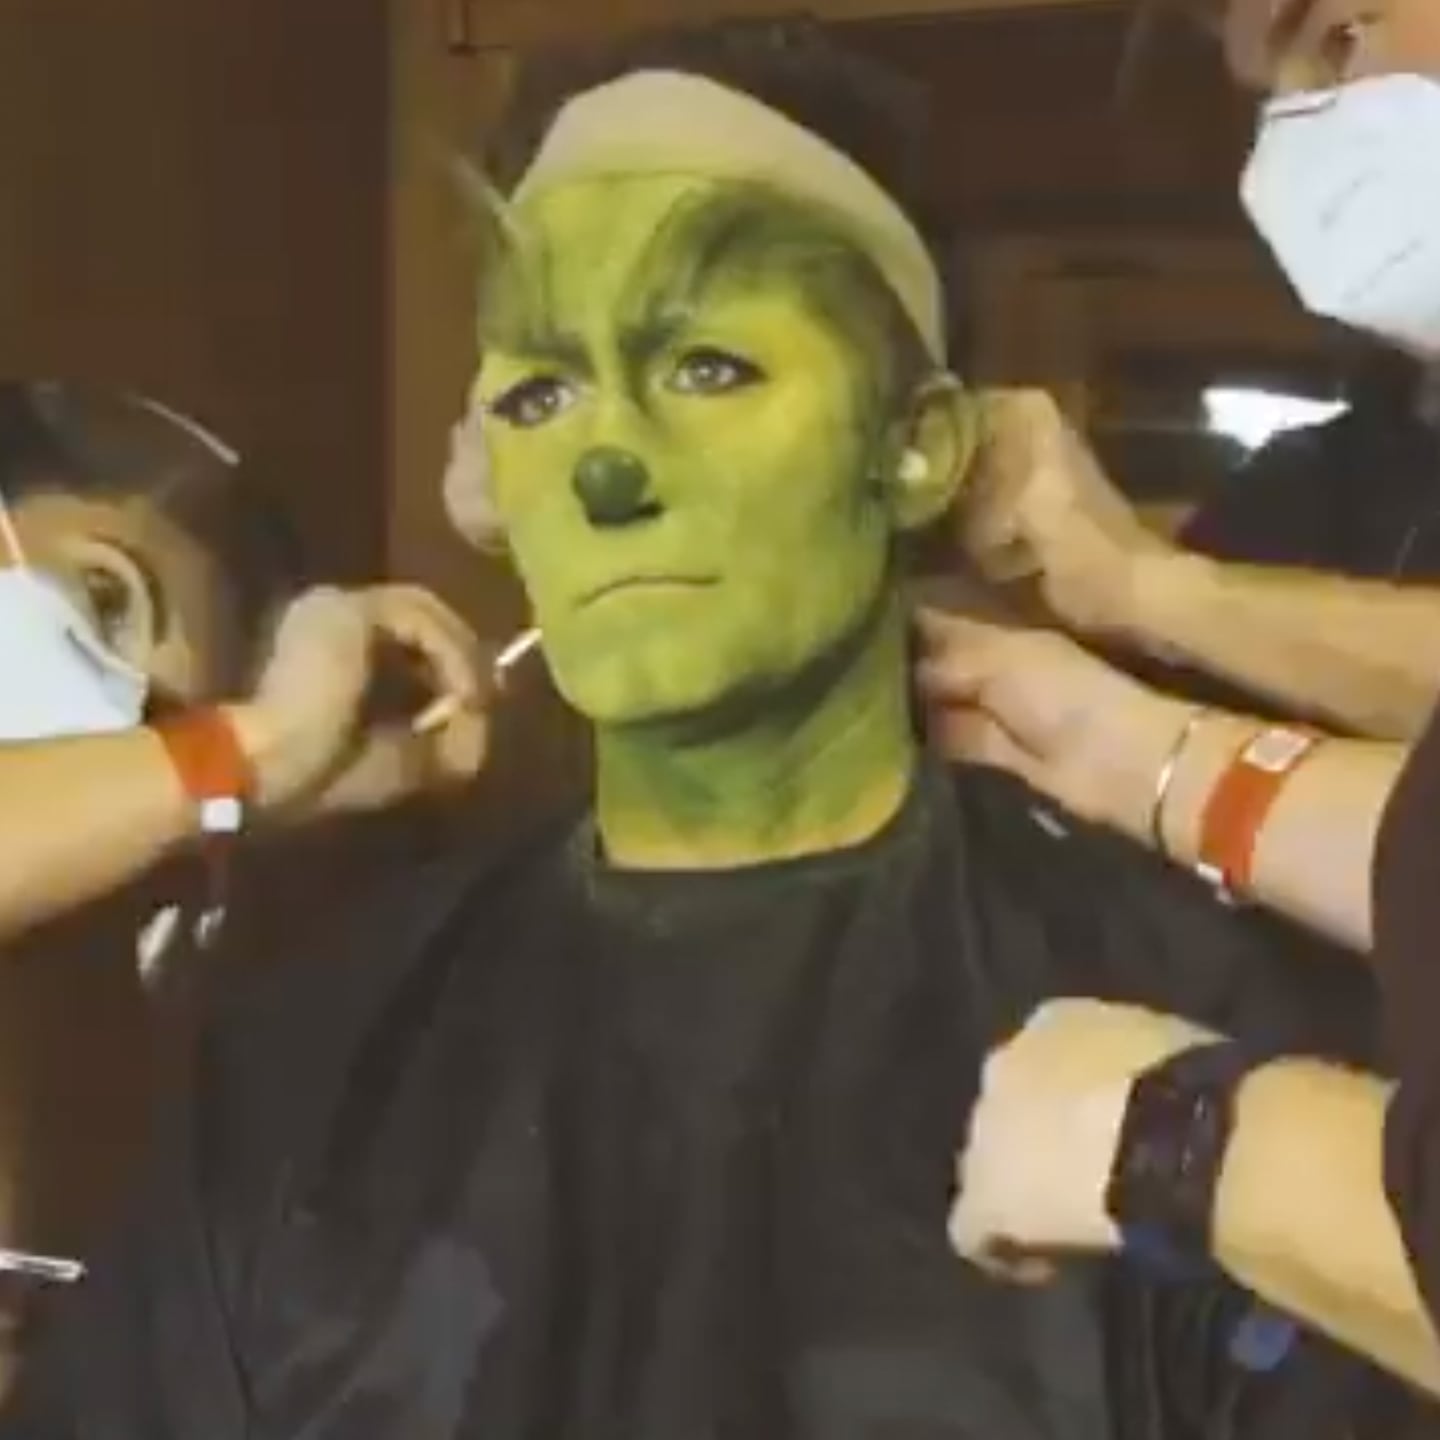 Transforming into The Grinch Makeup Tutorial 